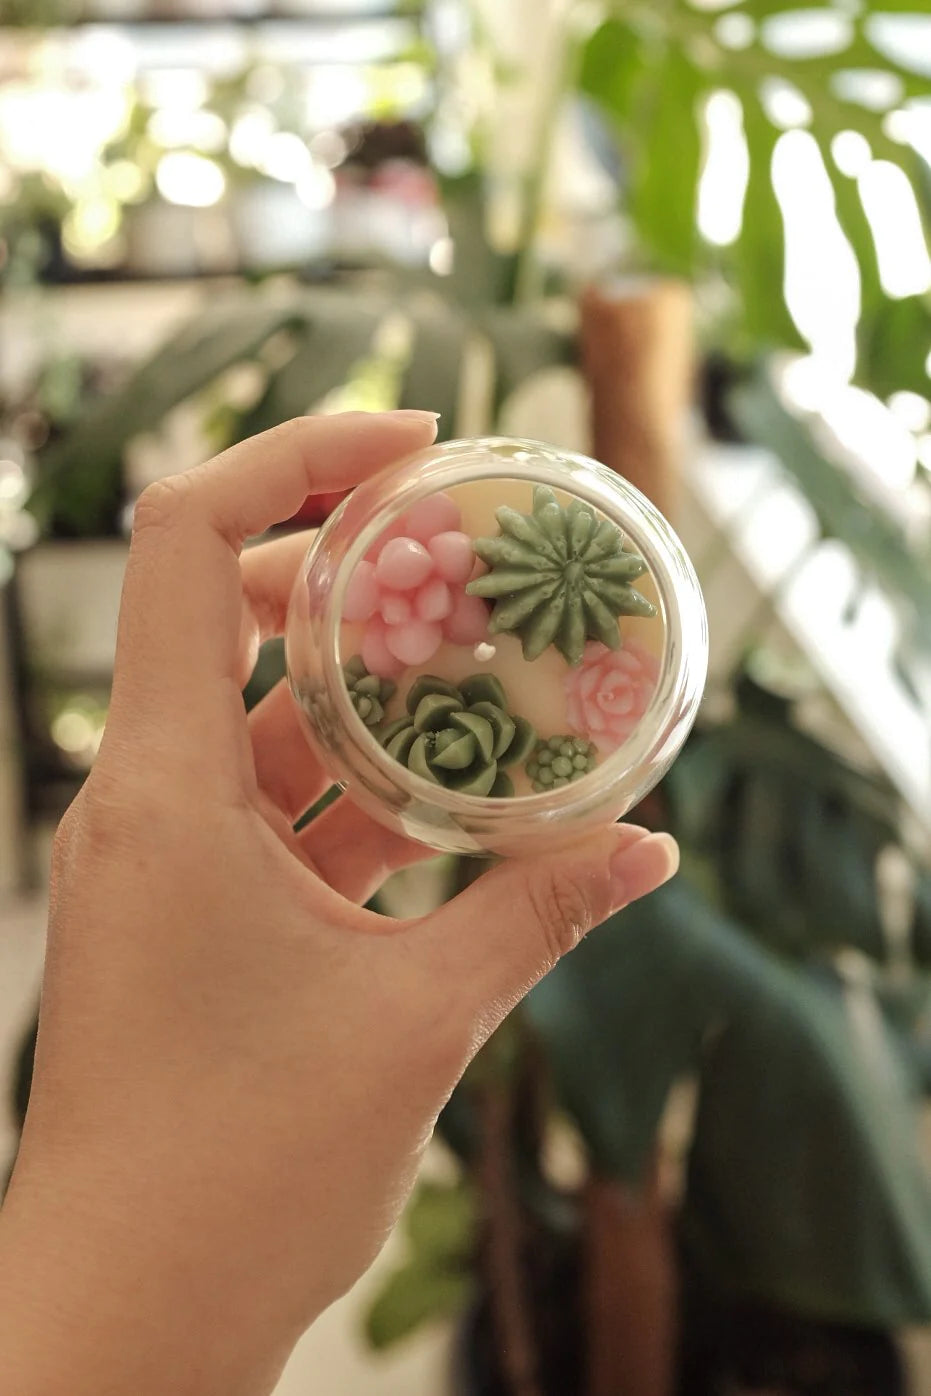 A person holding a small, transparent spherical container displaying a collection of delicate, lifelike succulents and flowers, including the Judean Desert Mini Terrarium Candle by Faith & Joy, against a backdrop of lush green plants.